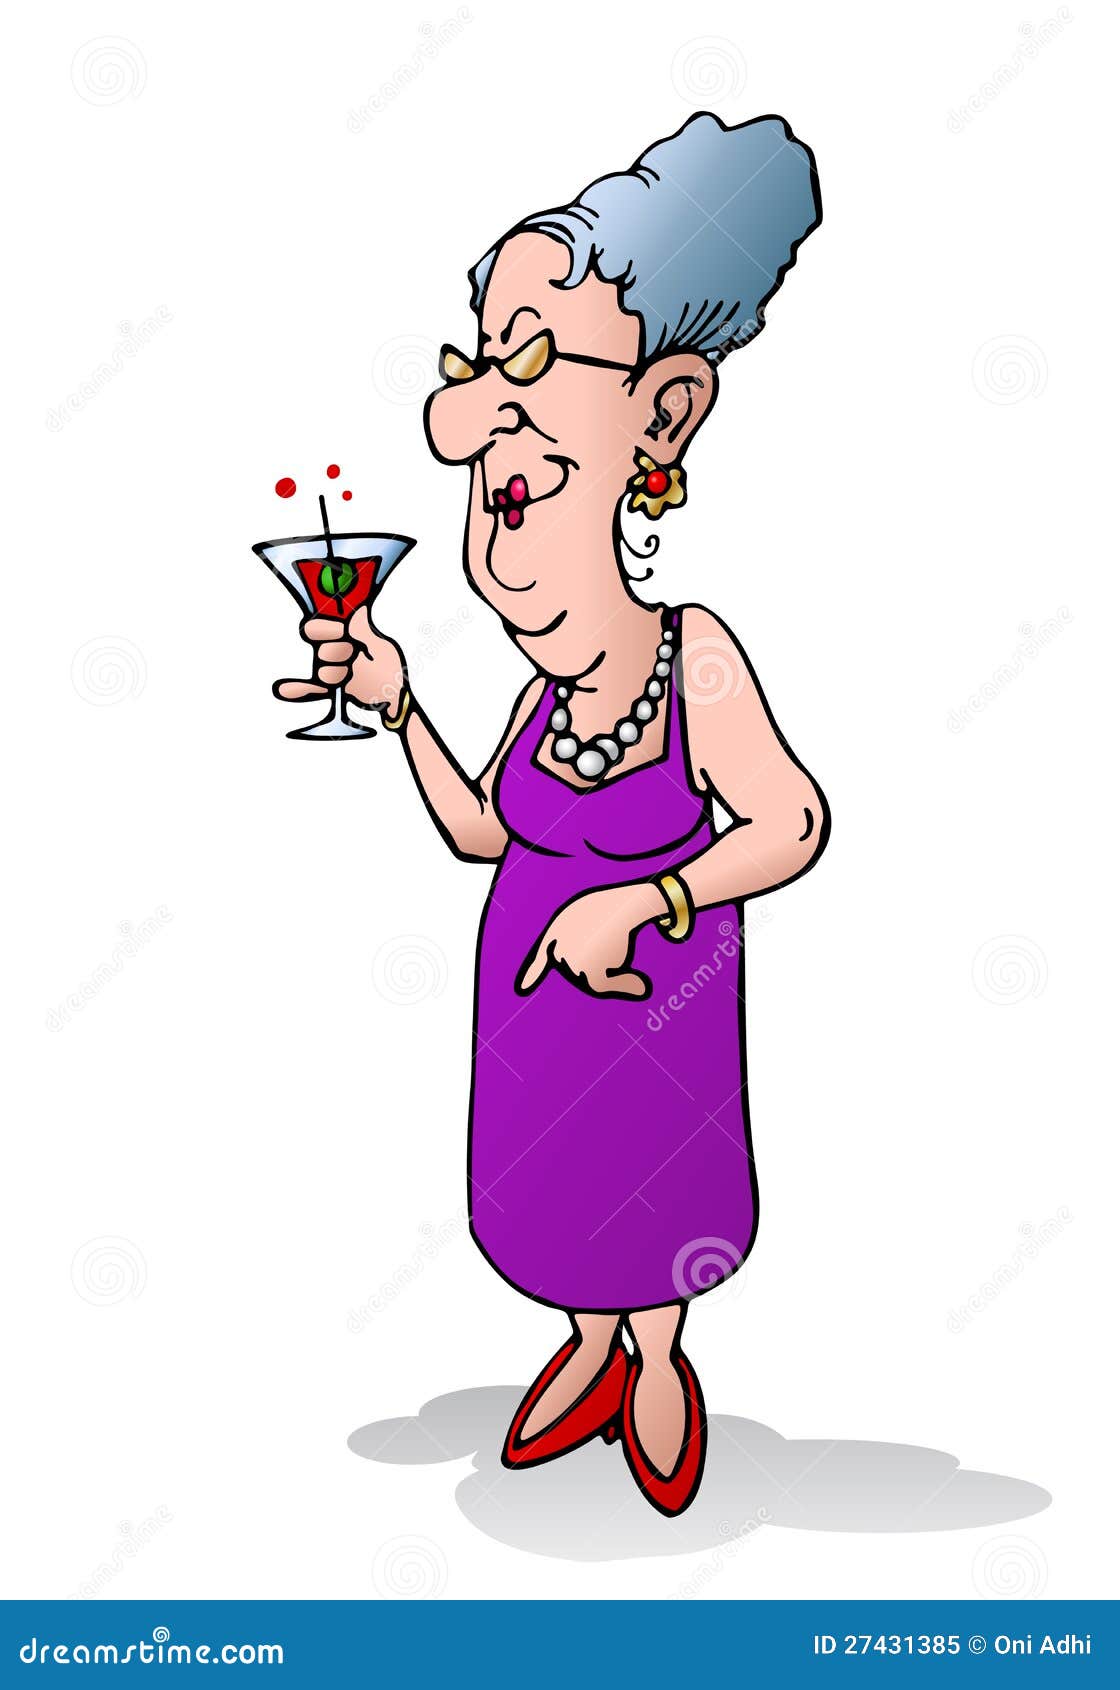 Old Woman Holding Beverage Royalty Free Stock Photo - Image: 27431385